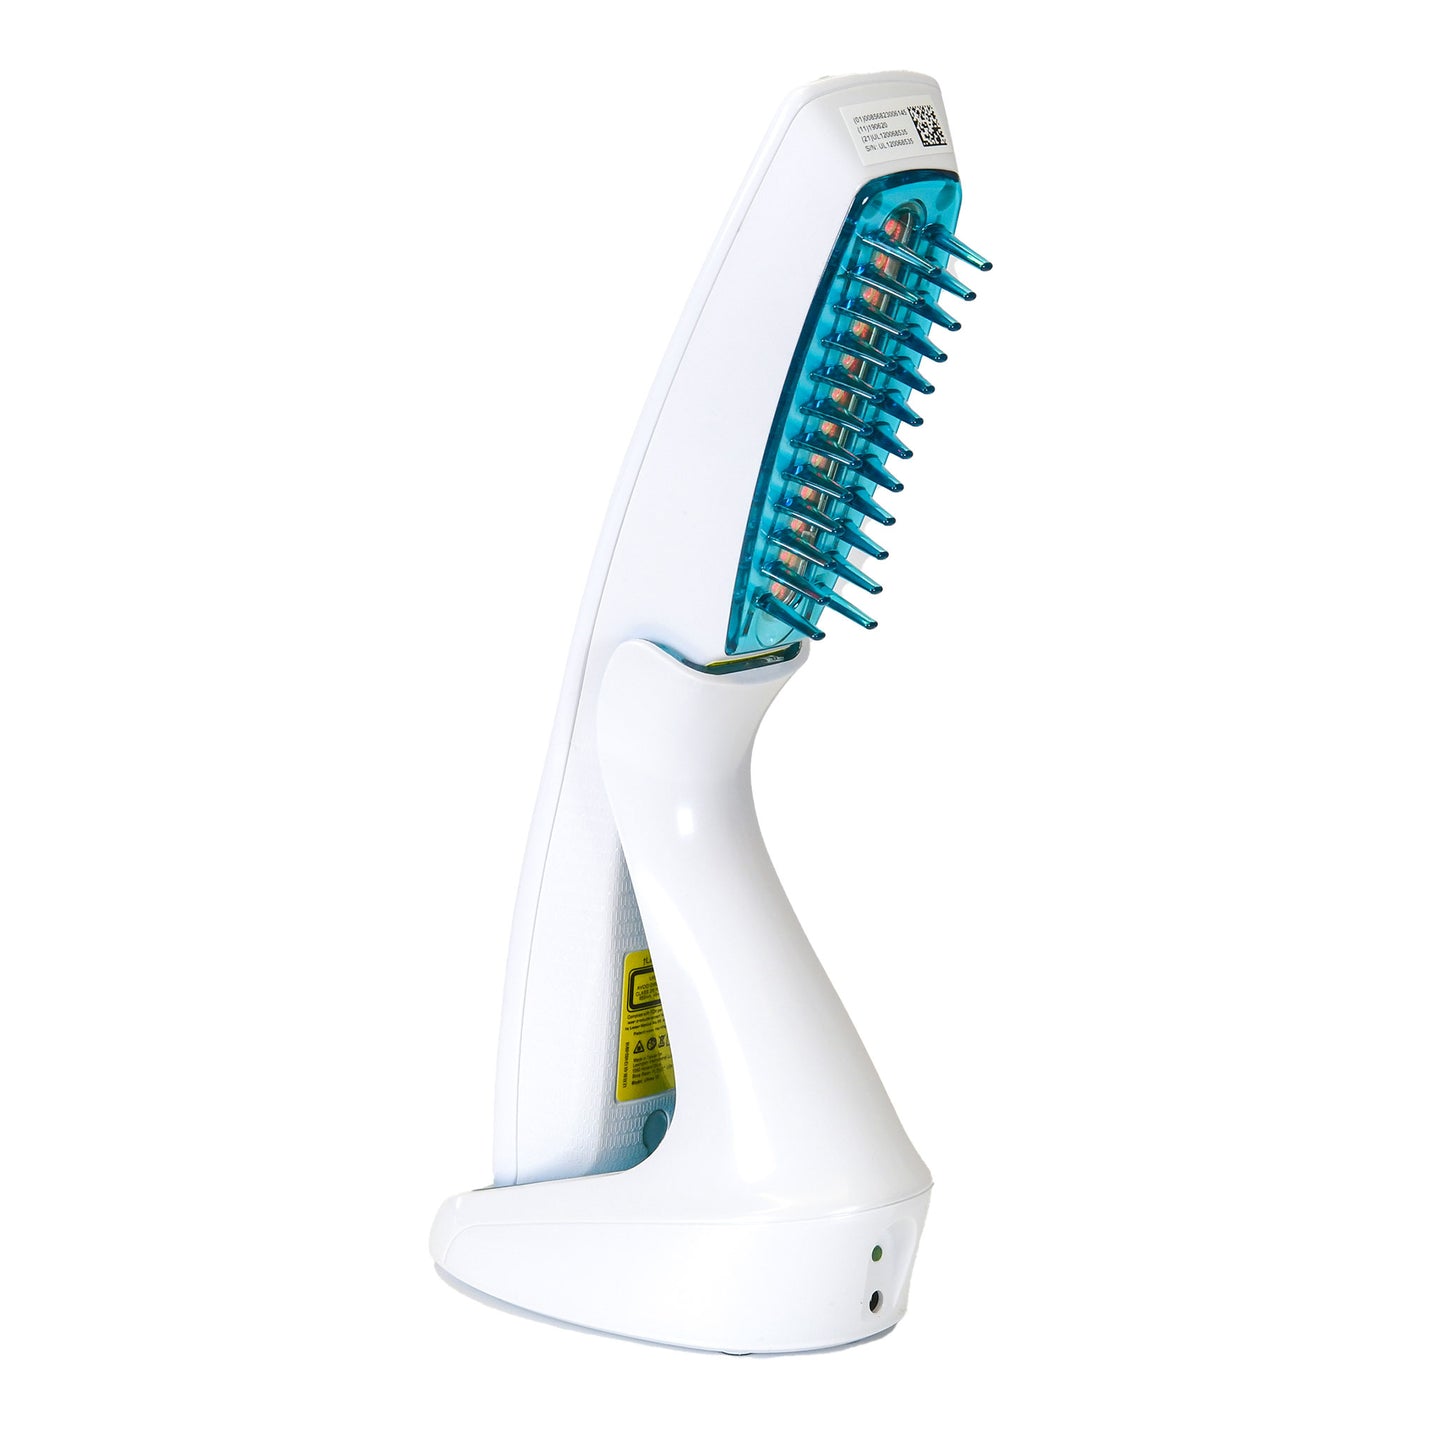 Ultima 12 LaserComb Hair Growth Device by HairMax | Laser Device - Hair Club